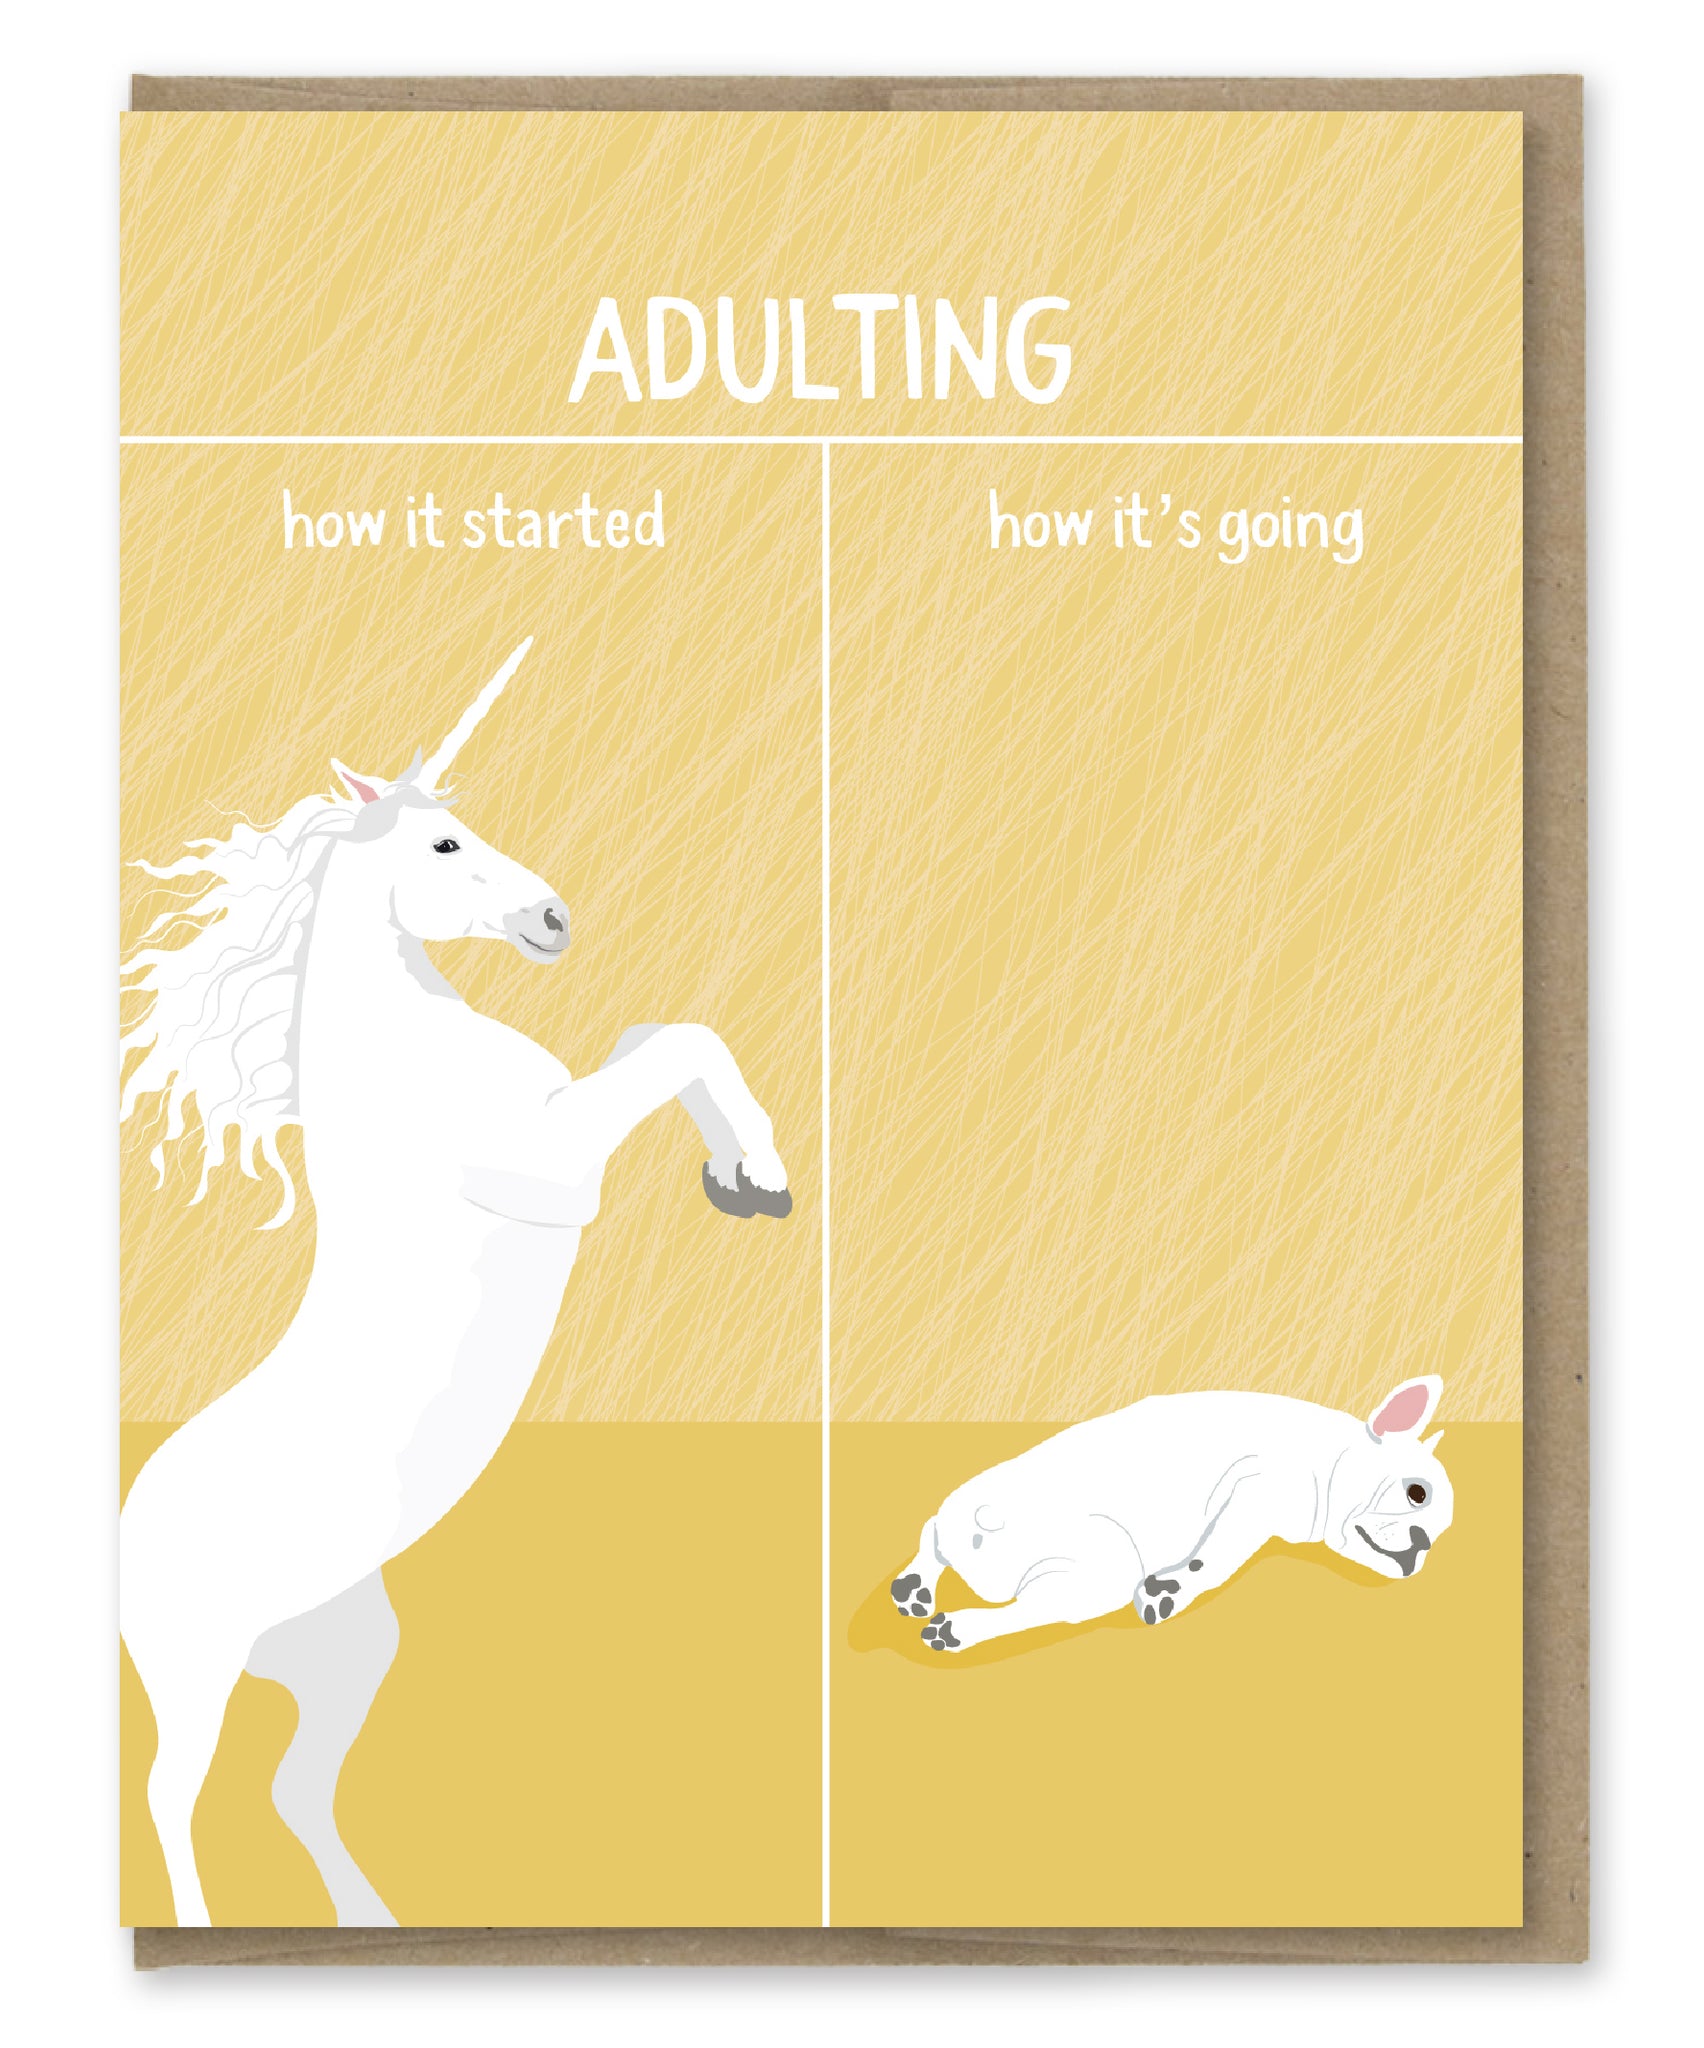 ADULTING HOW IT'S GOING CARD